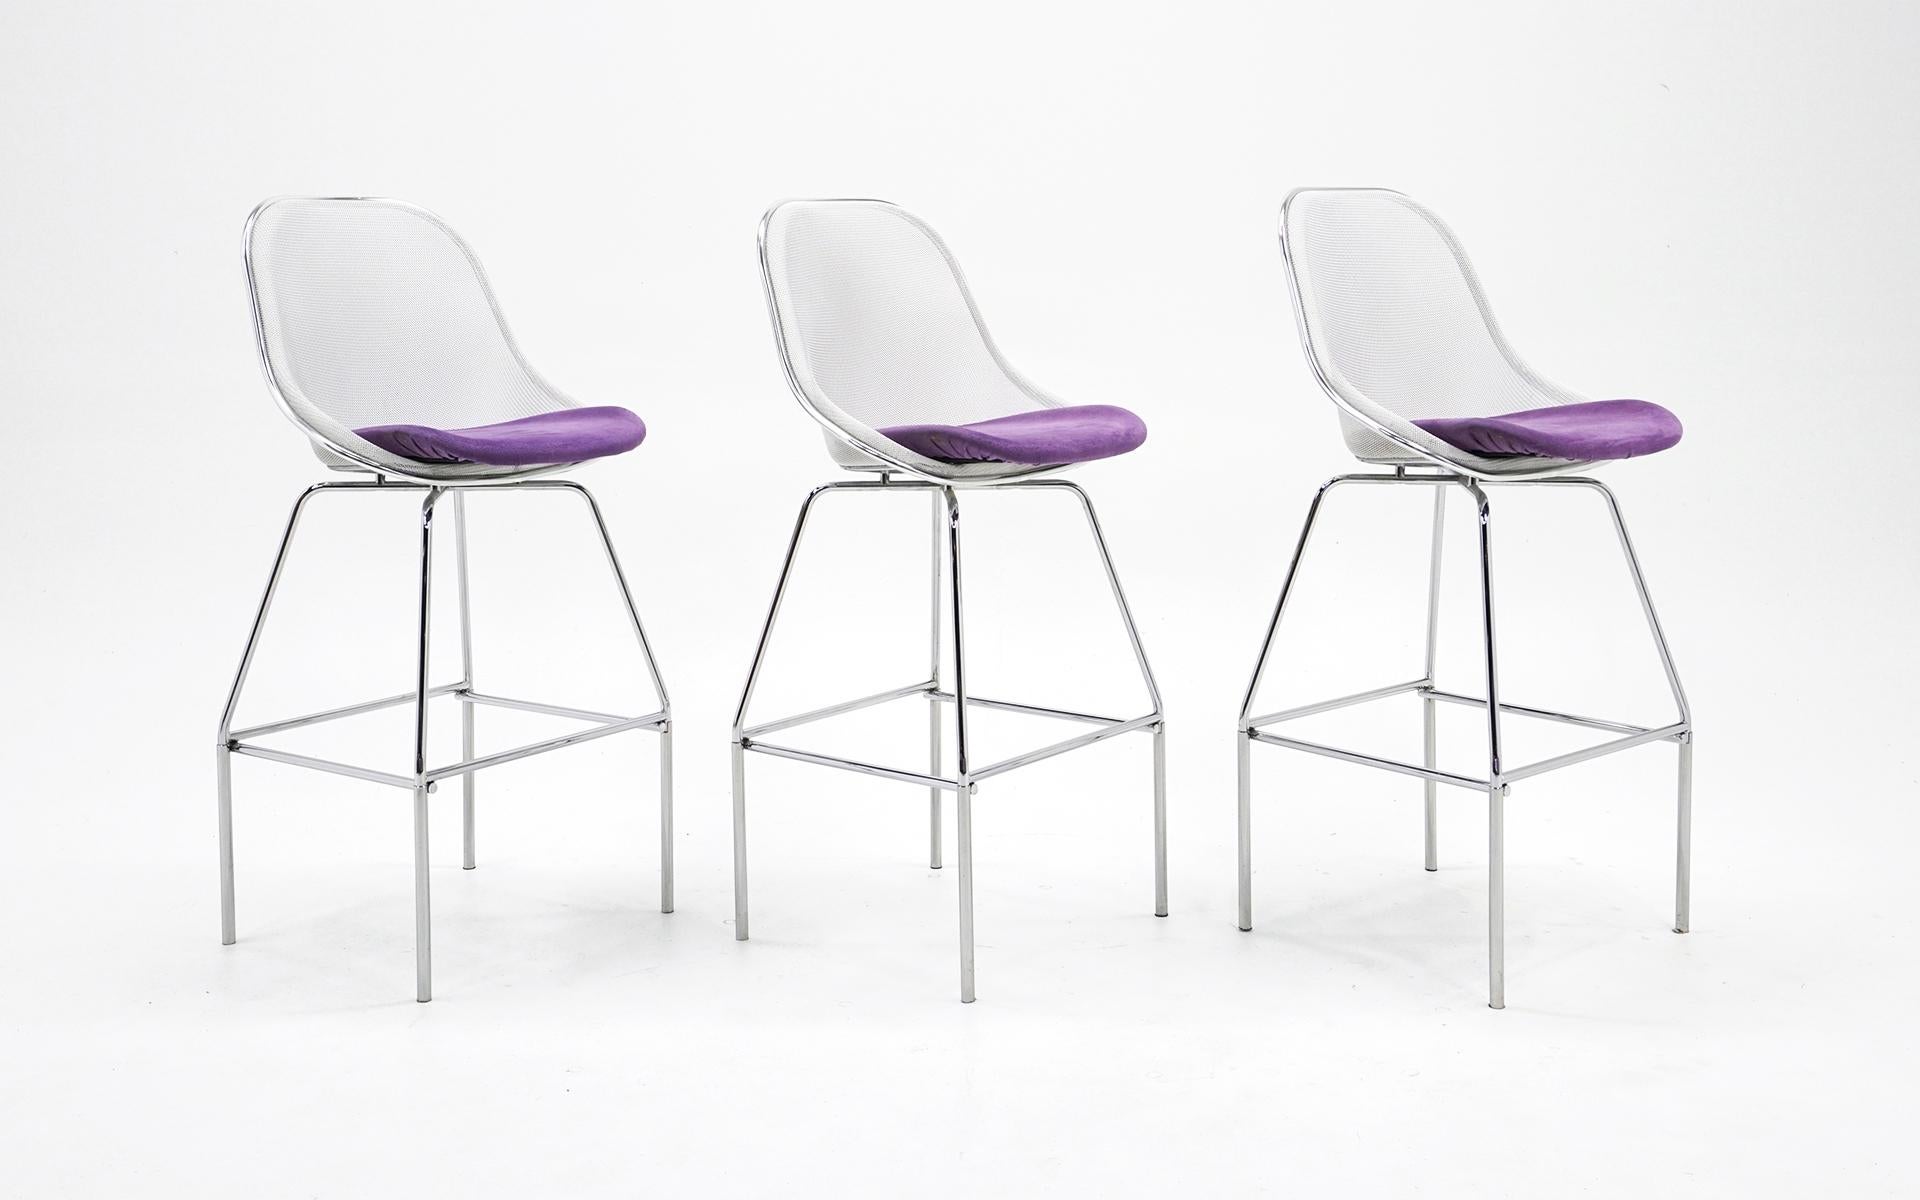 Set of 6 Antonio Citterio for B&B Italia Luta Barstools. You can buy these in any quantity up to six. The Iuta bar stools are a B&B Italia icon. The seat is a molded technical wire mesh shell in white with a profiled aluminum edging and chromed